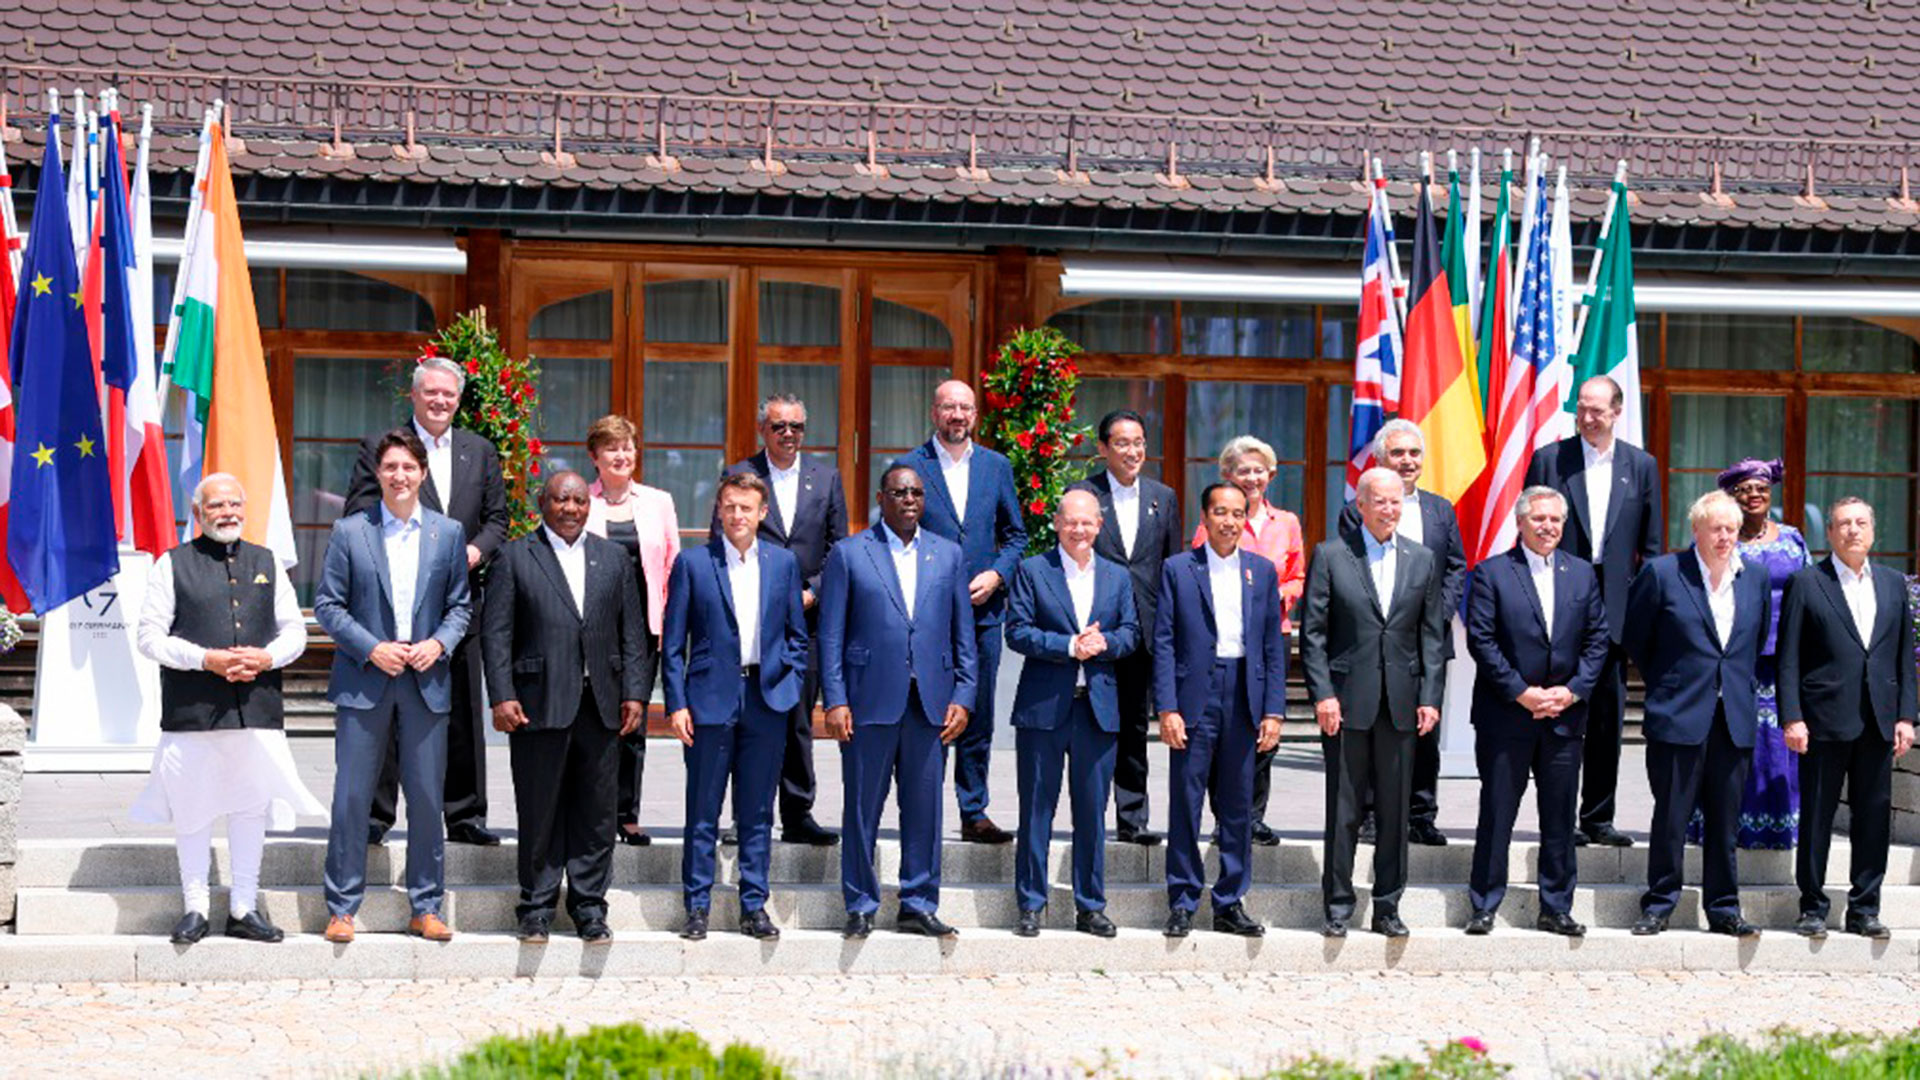 The family photo of the main world leaders participating in the G7